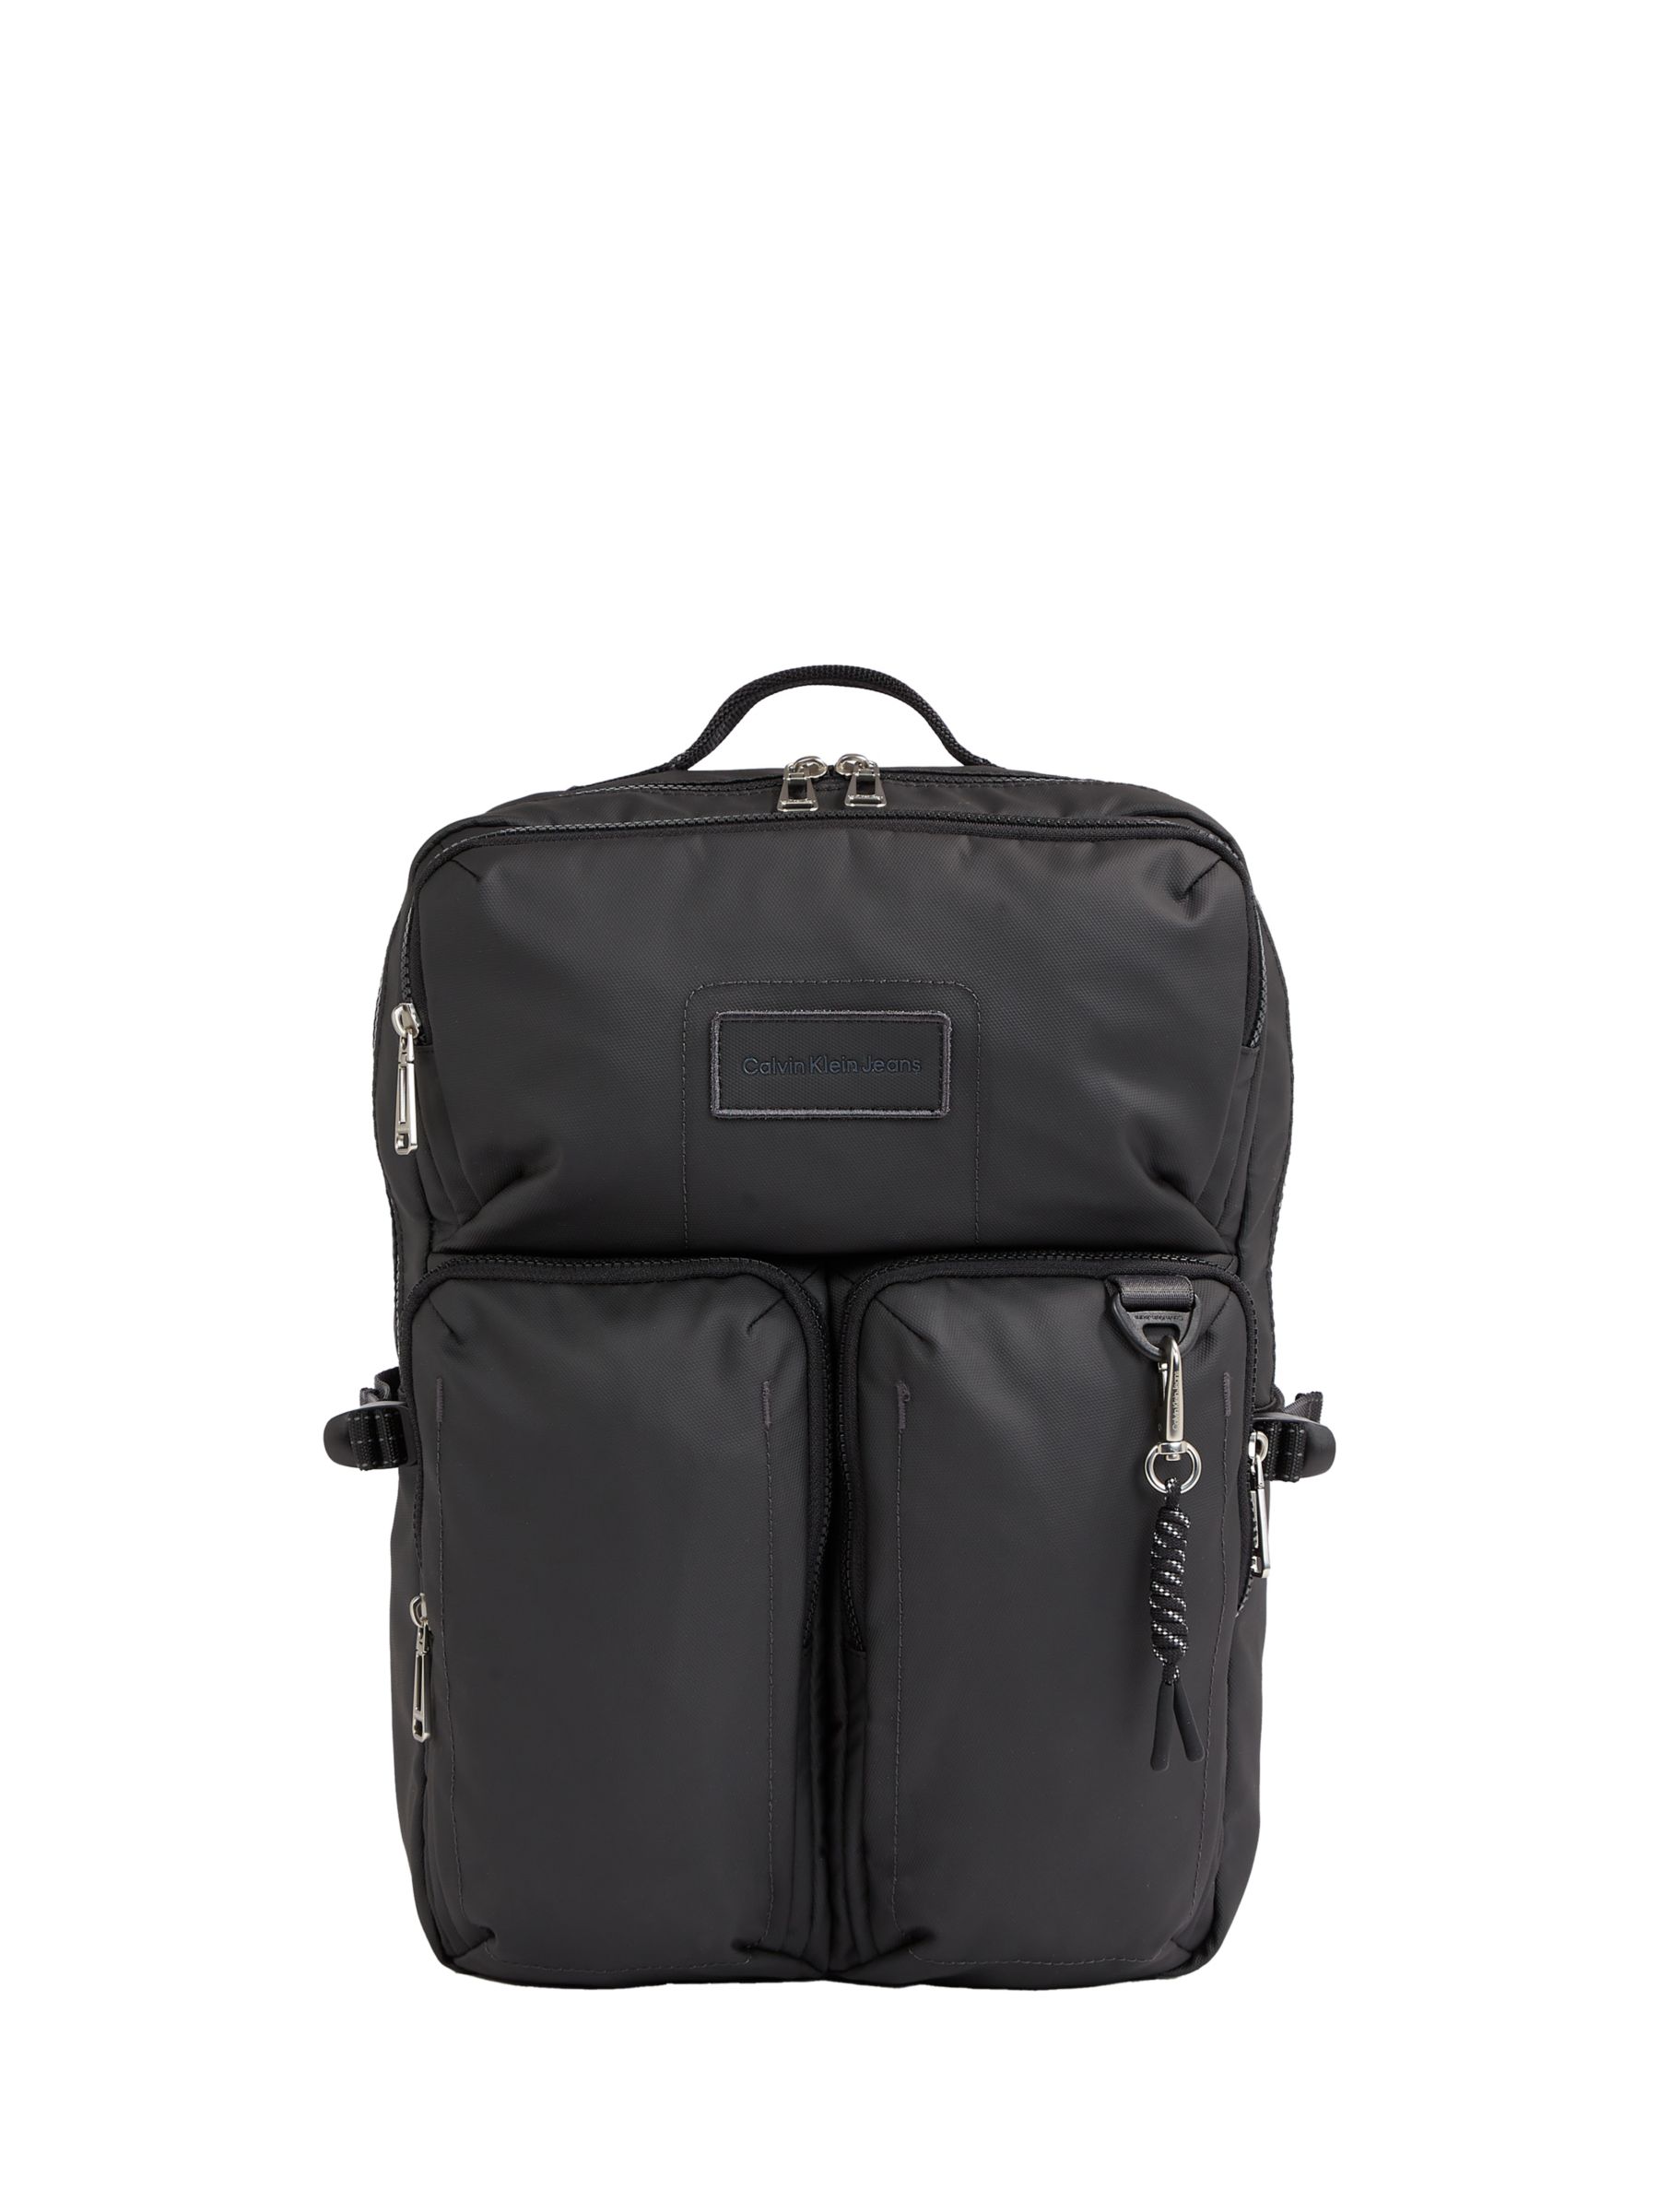 Calvin Klein Jeans Recycled Backpack, Black